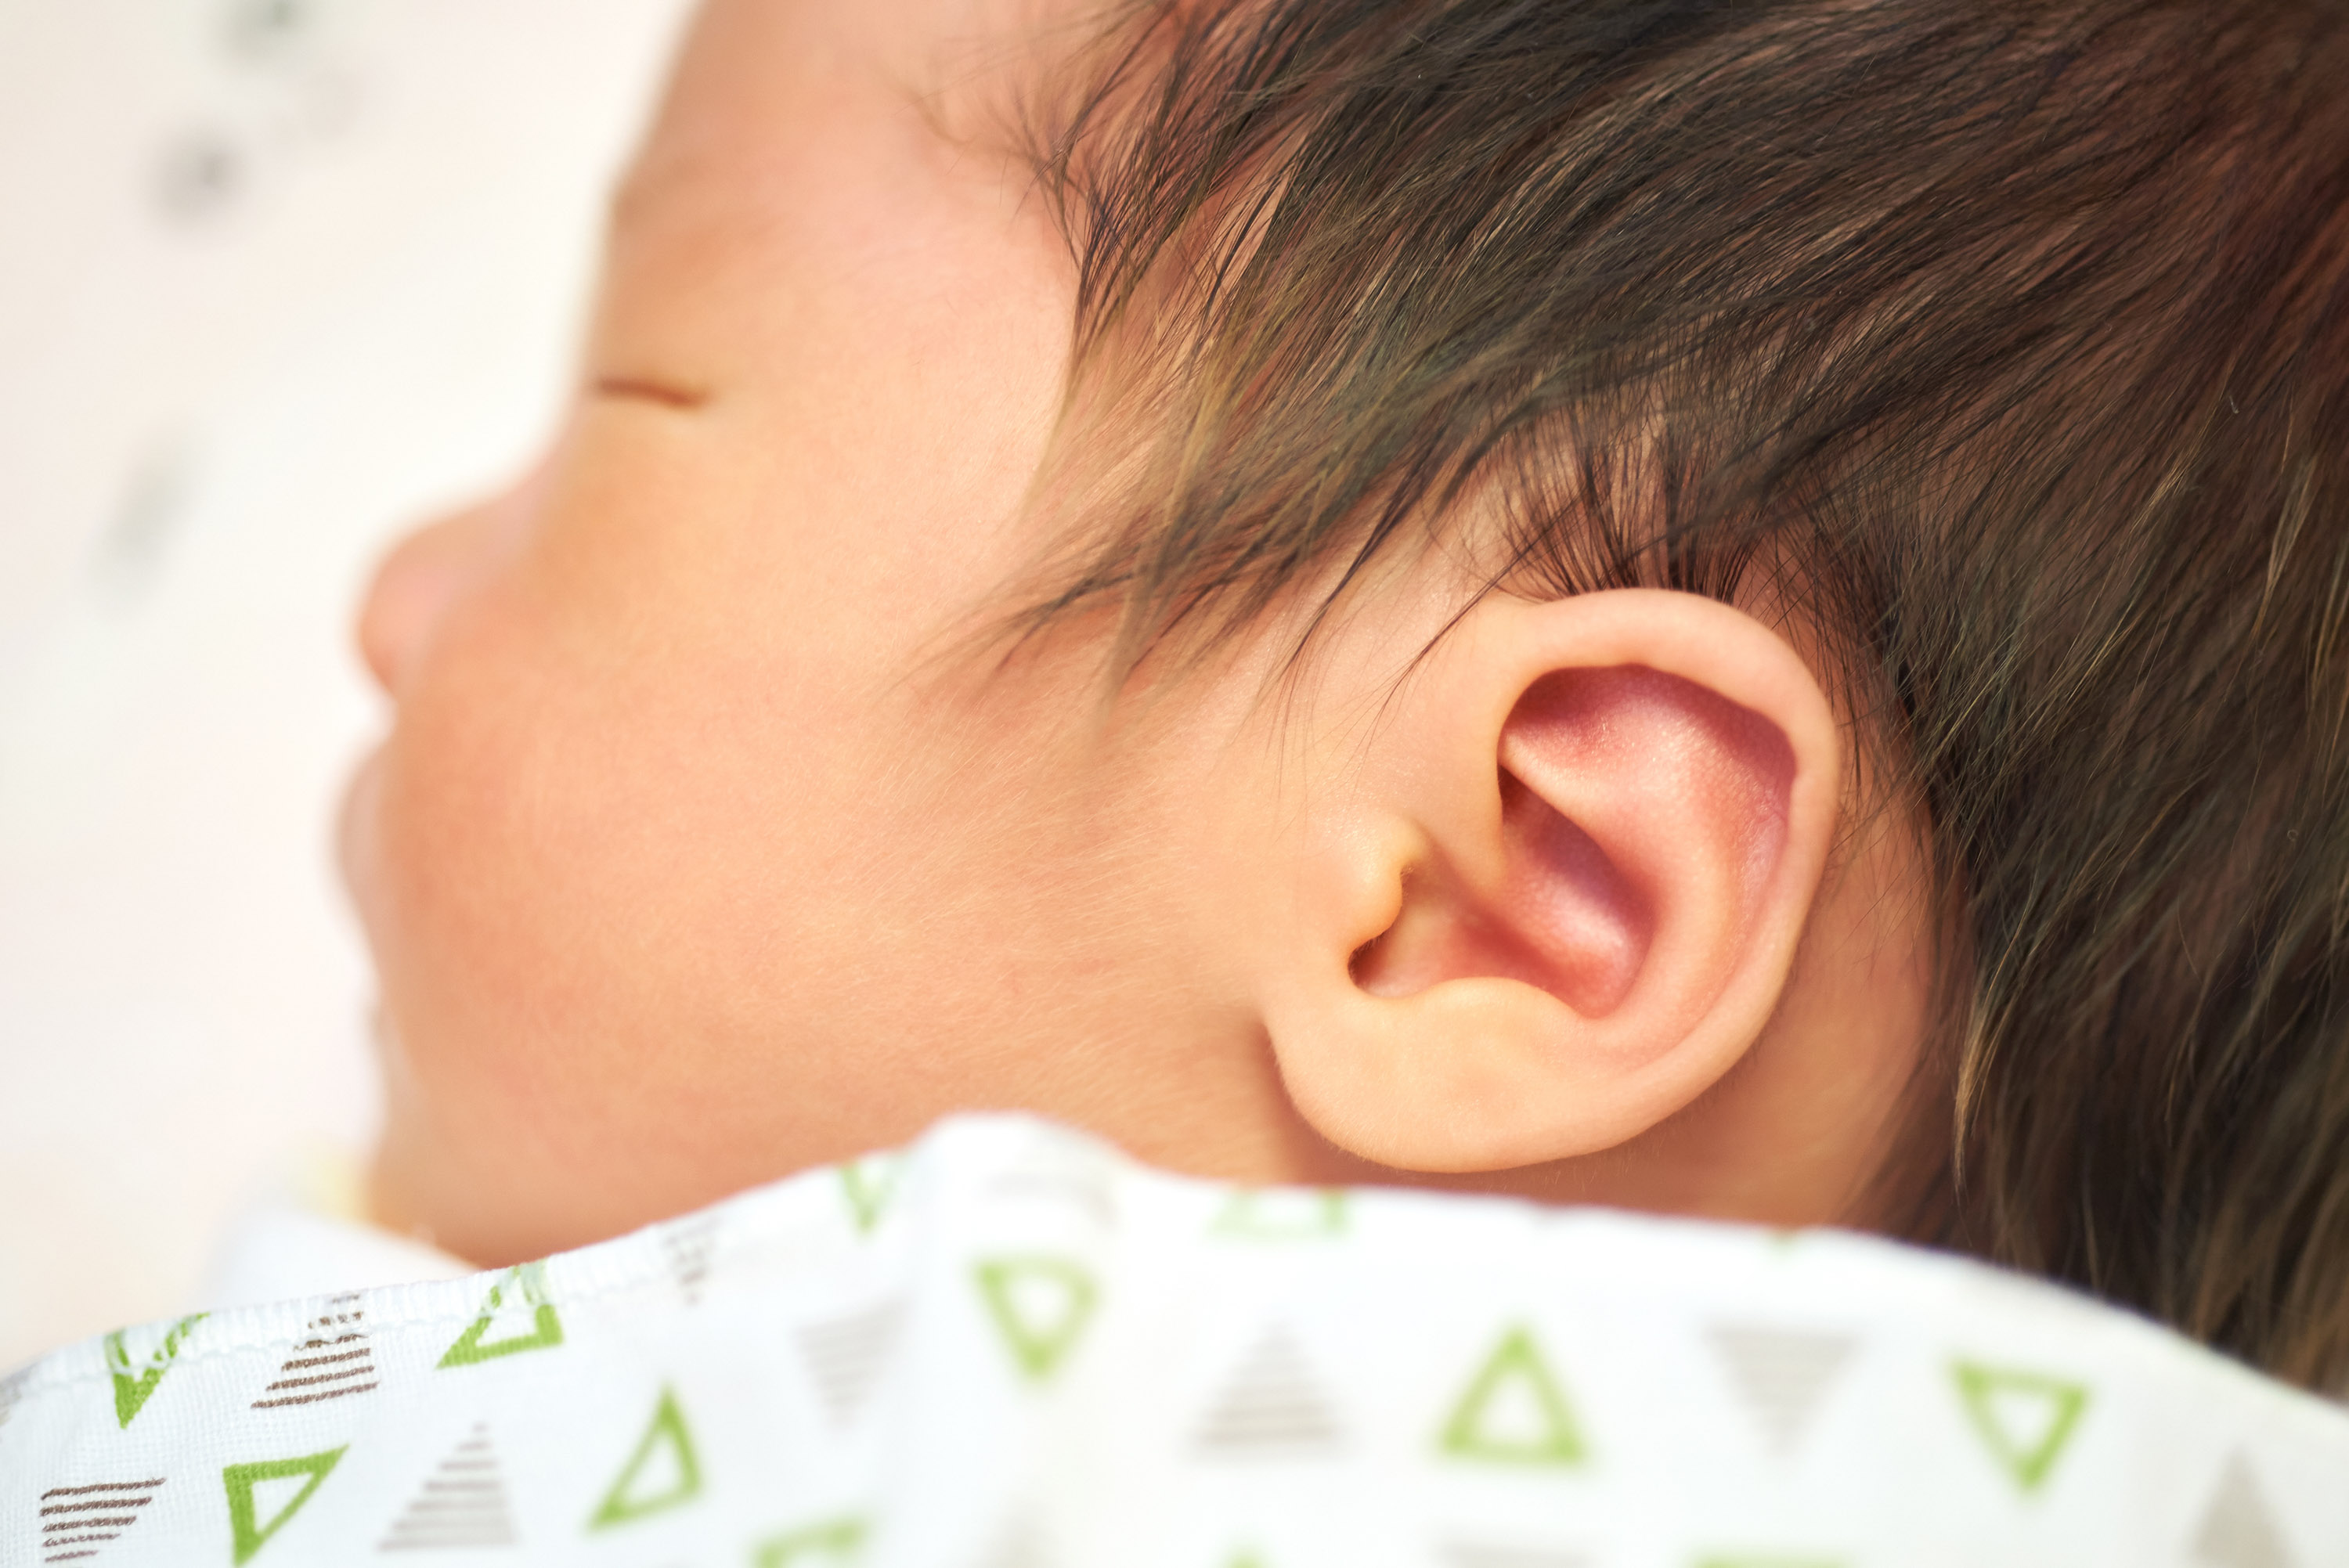 close up view of a sleeping baby from the side